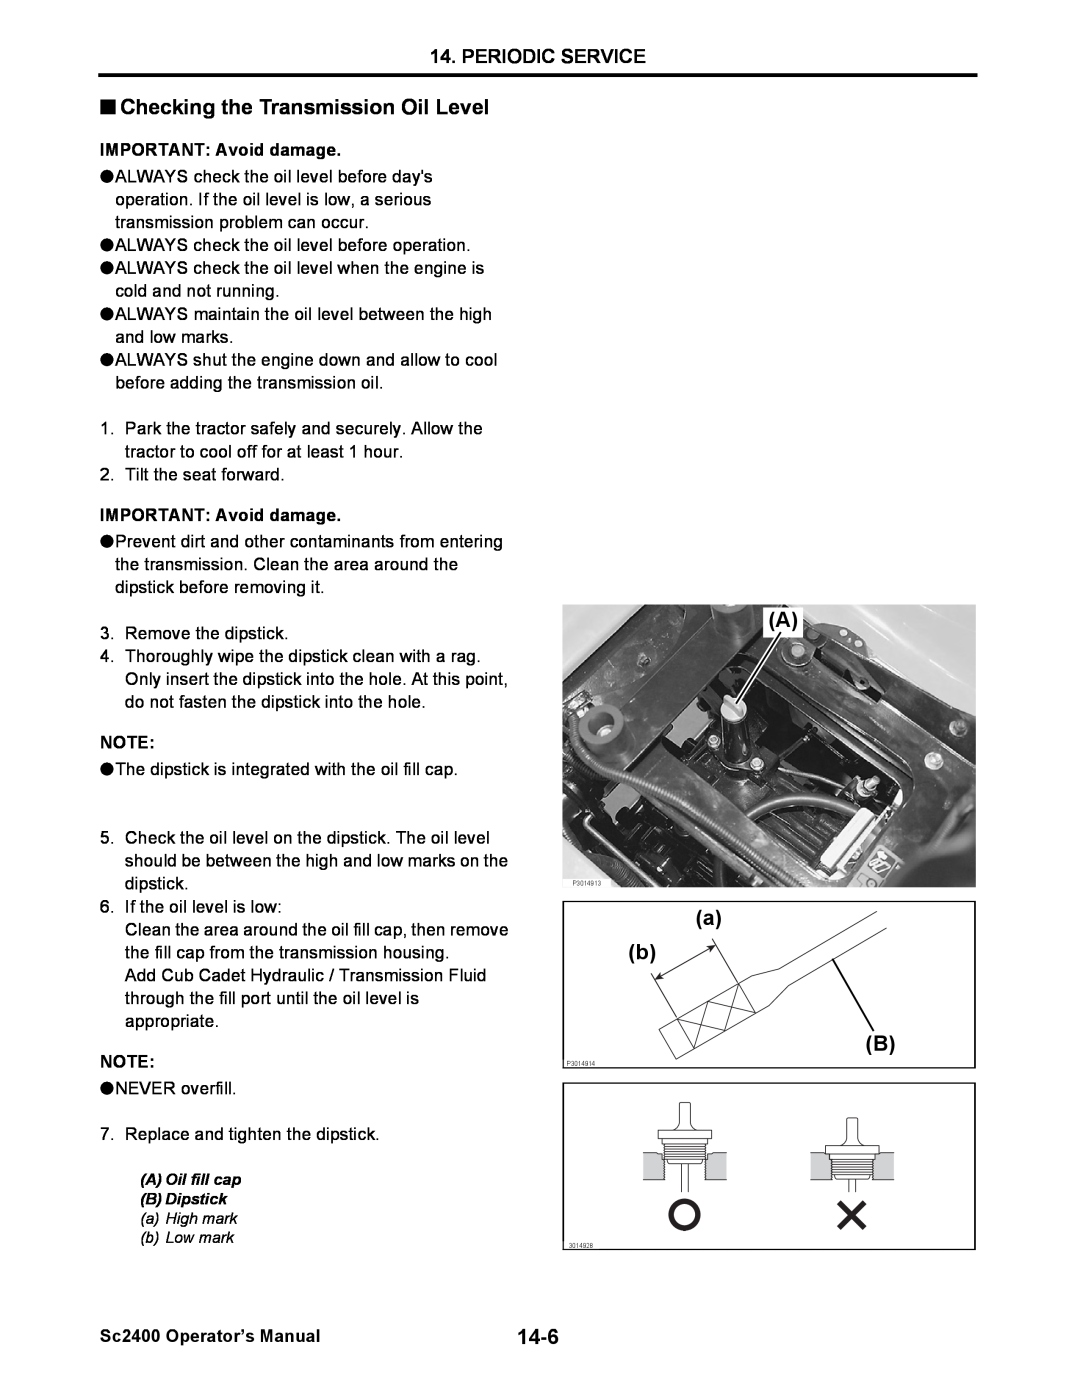 Cub Cadet SC2400 manual Checking the Transmission Oil Level, a b B, 14-6, Periodic Service, IMPORTANT: Avoid damage 